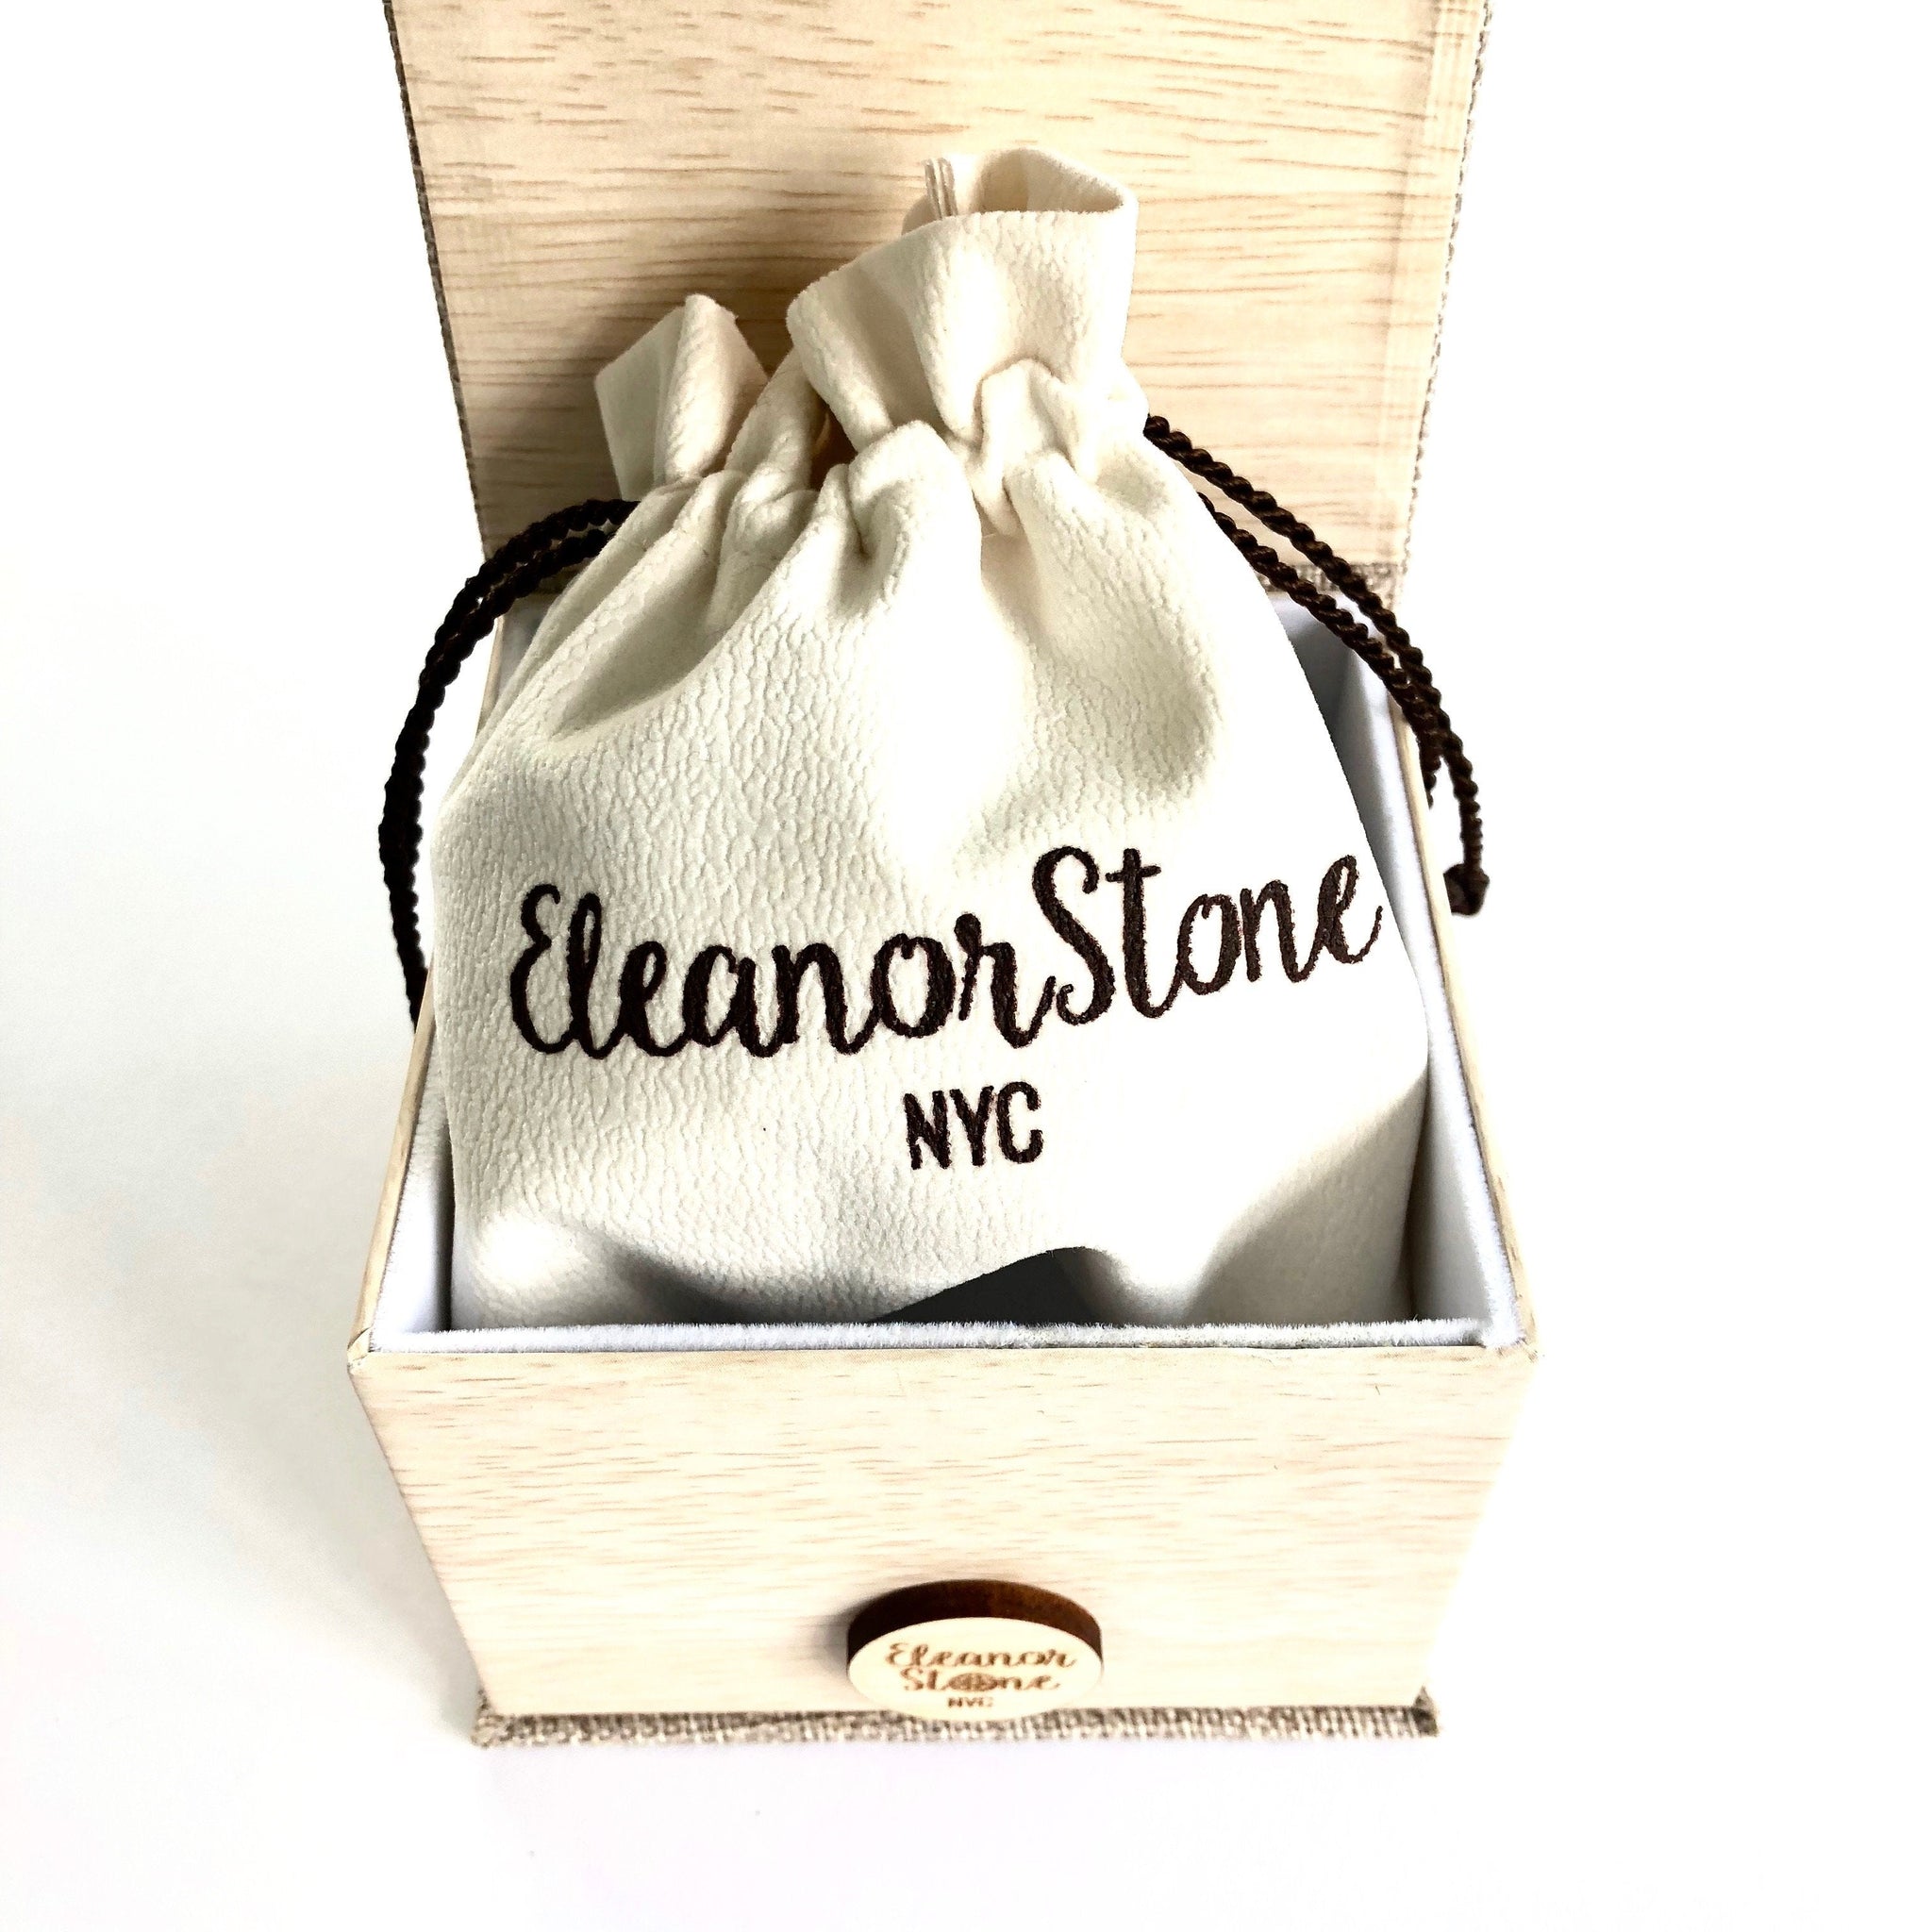 Little Ray of Sunlight leather double wrap cuff bracelet – Eleanor Stone  NYC